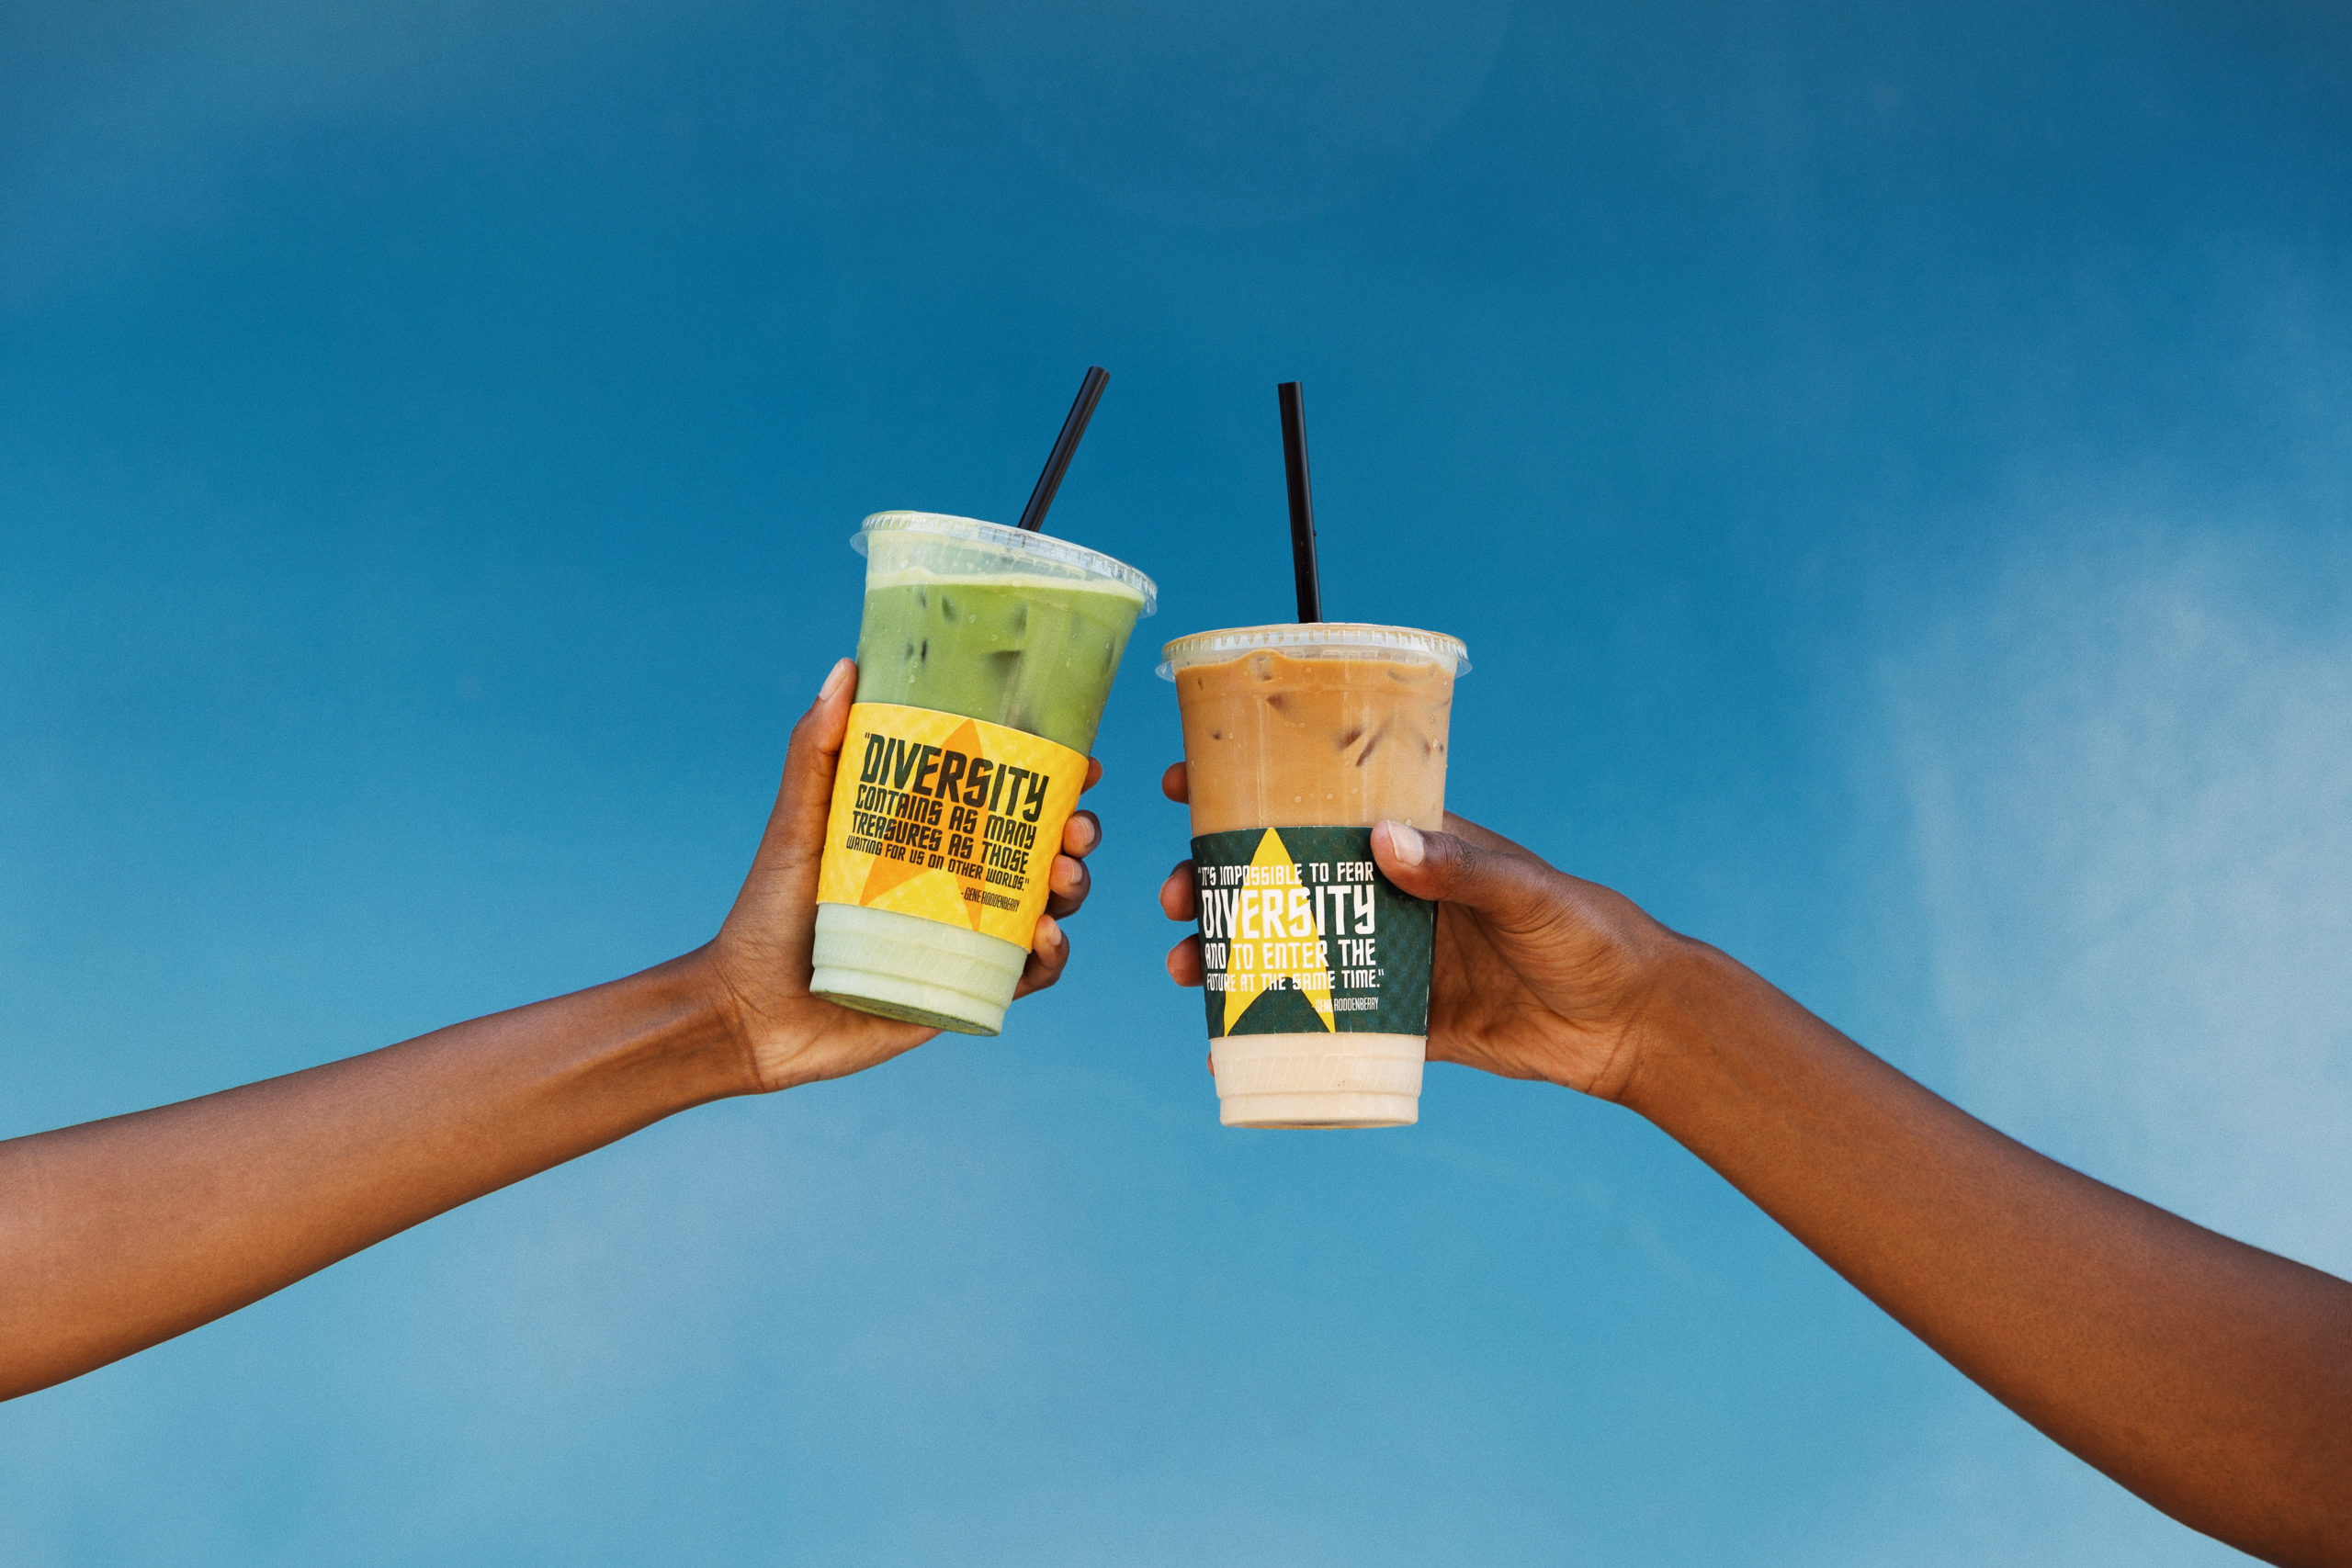 Two people's outstretched arms toasting with their iced coffee drinks against a beautiful blue sky.